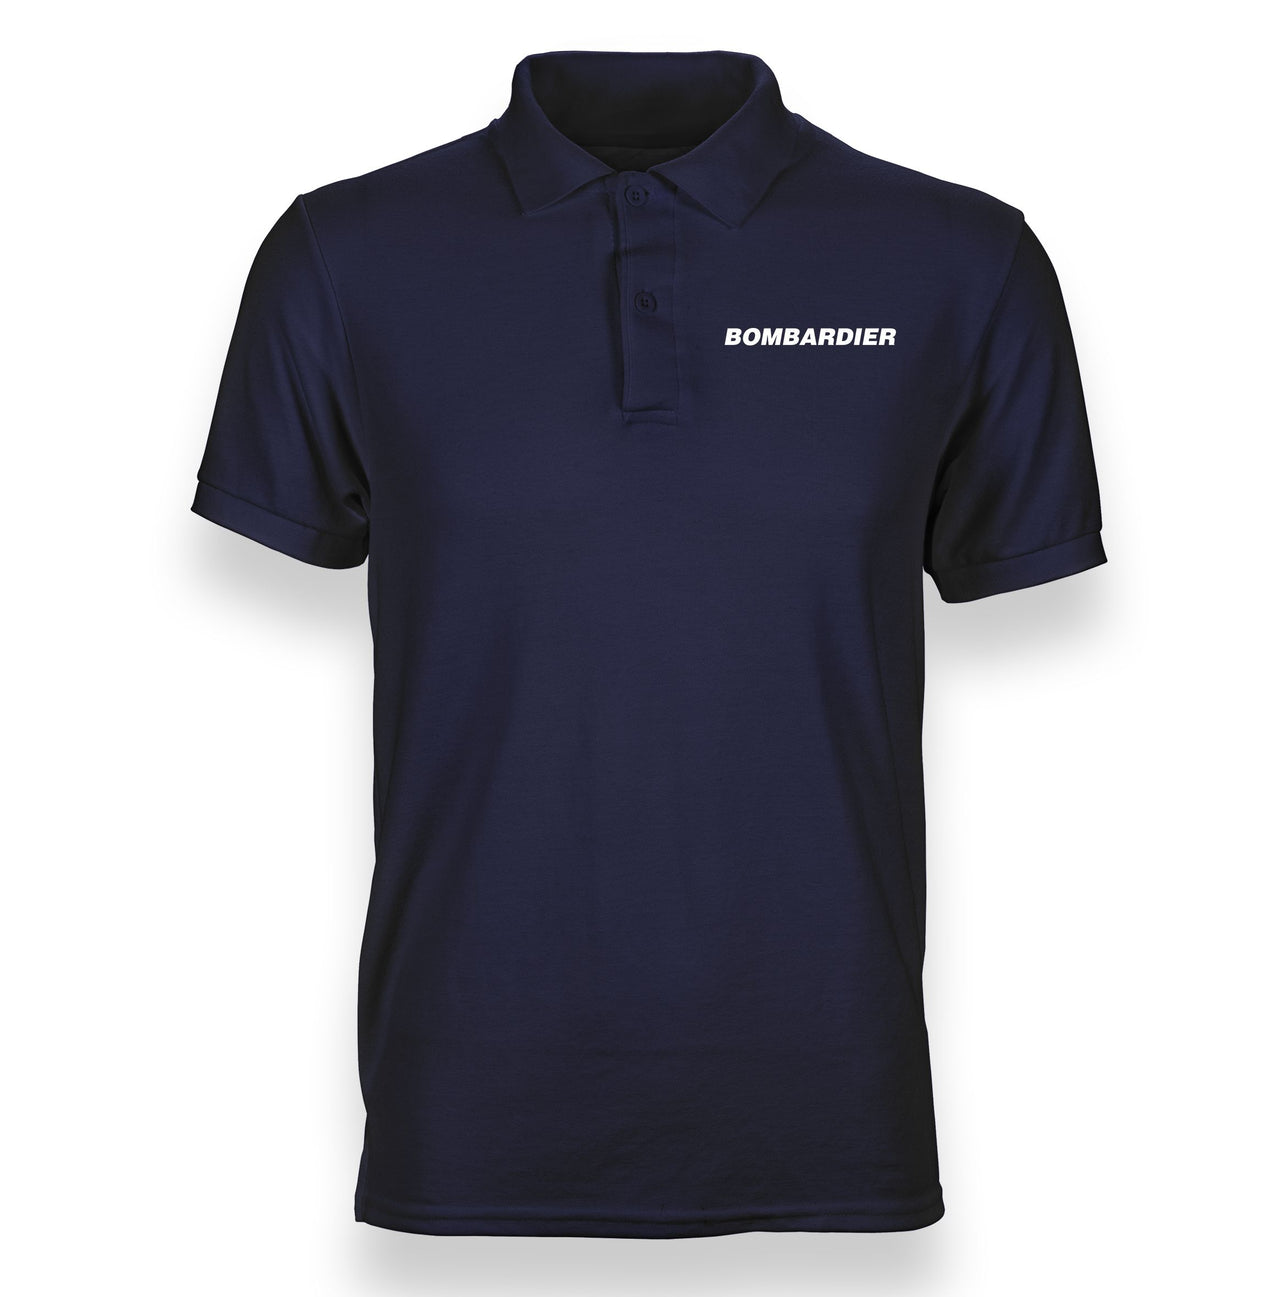 Bombardier & Text Designed Polo T-Shirts